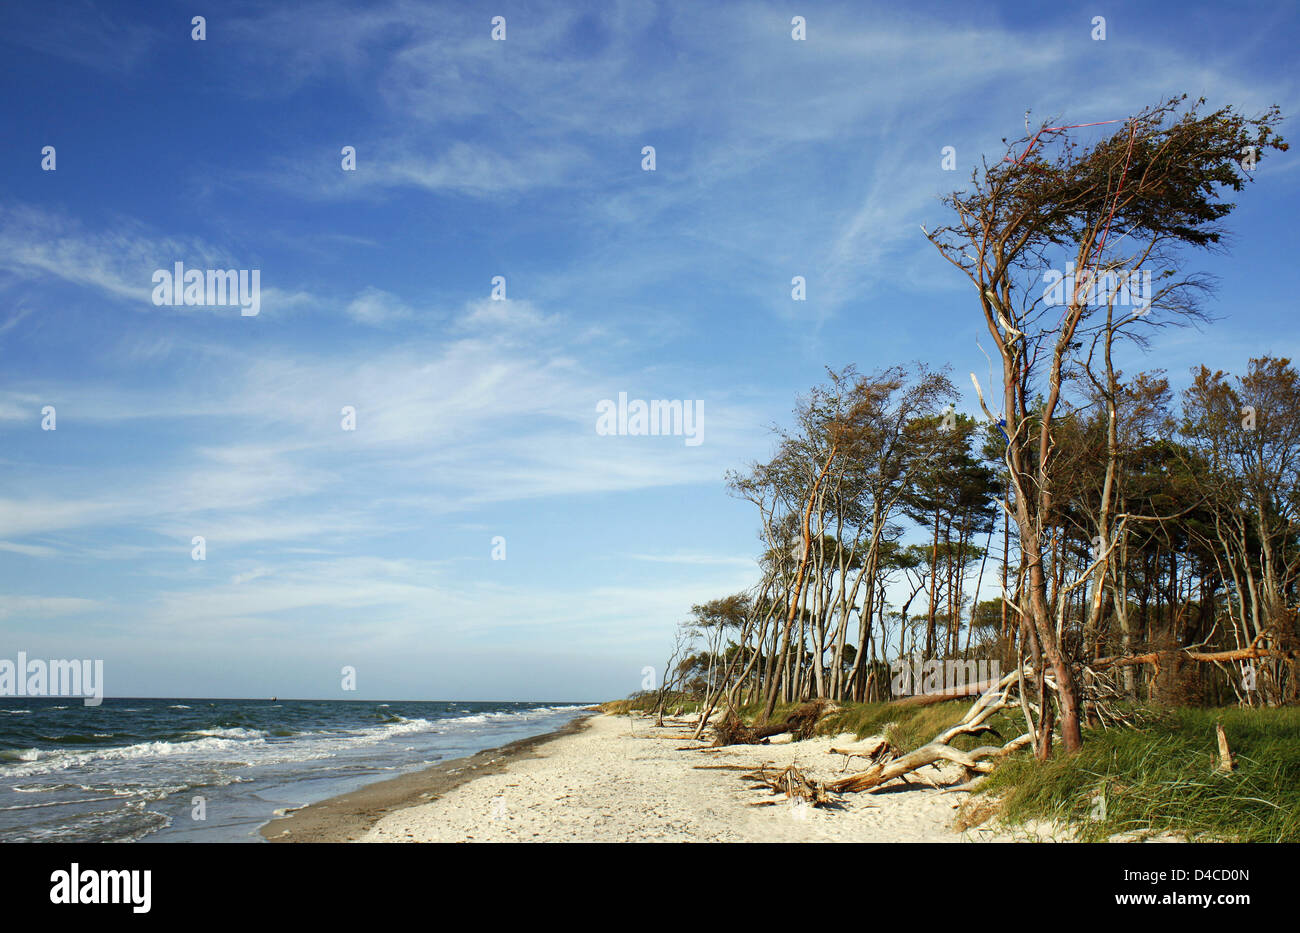 The picture shows the west beach of the Darss-Zingst region at peninsula Fischland with trees bent by wind, in Fischland, Germany, 6 September 2007. The core area of Western Pomerania Lagoon Area National Park (Nationalpark Vorpommersche Boddenlandschaft) begins here. The Darß forest is closed for motorised vehicles and the beach and a light house can only be reached by foot, by bi Stock Photo